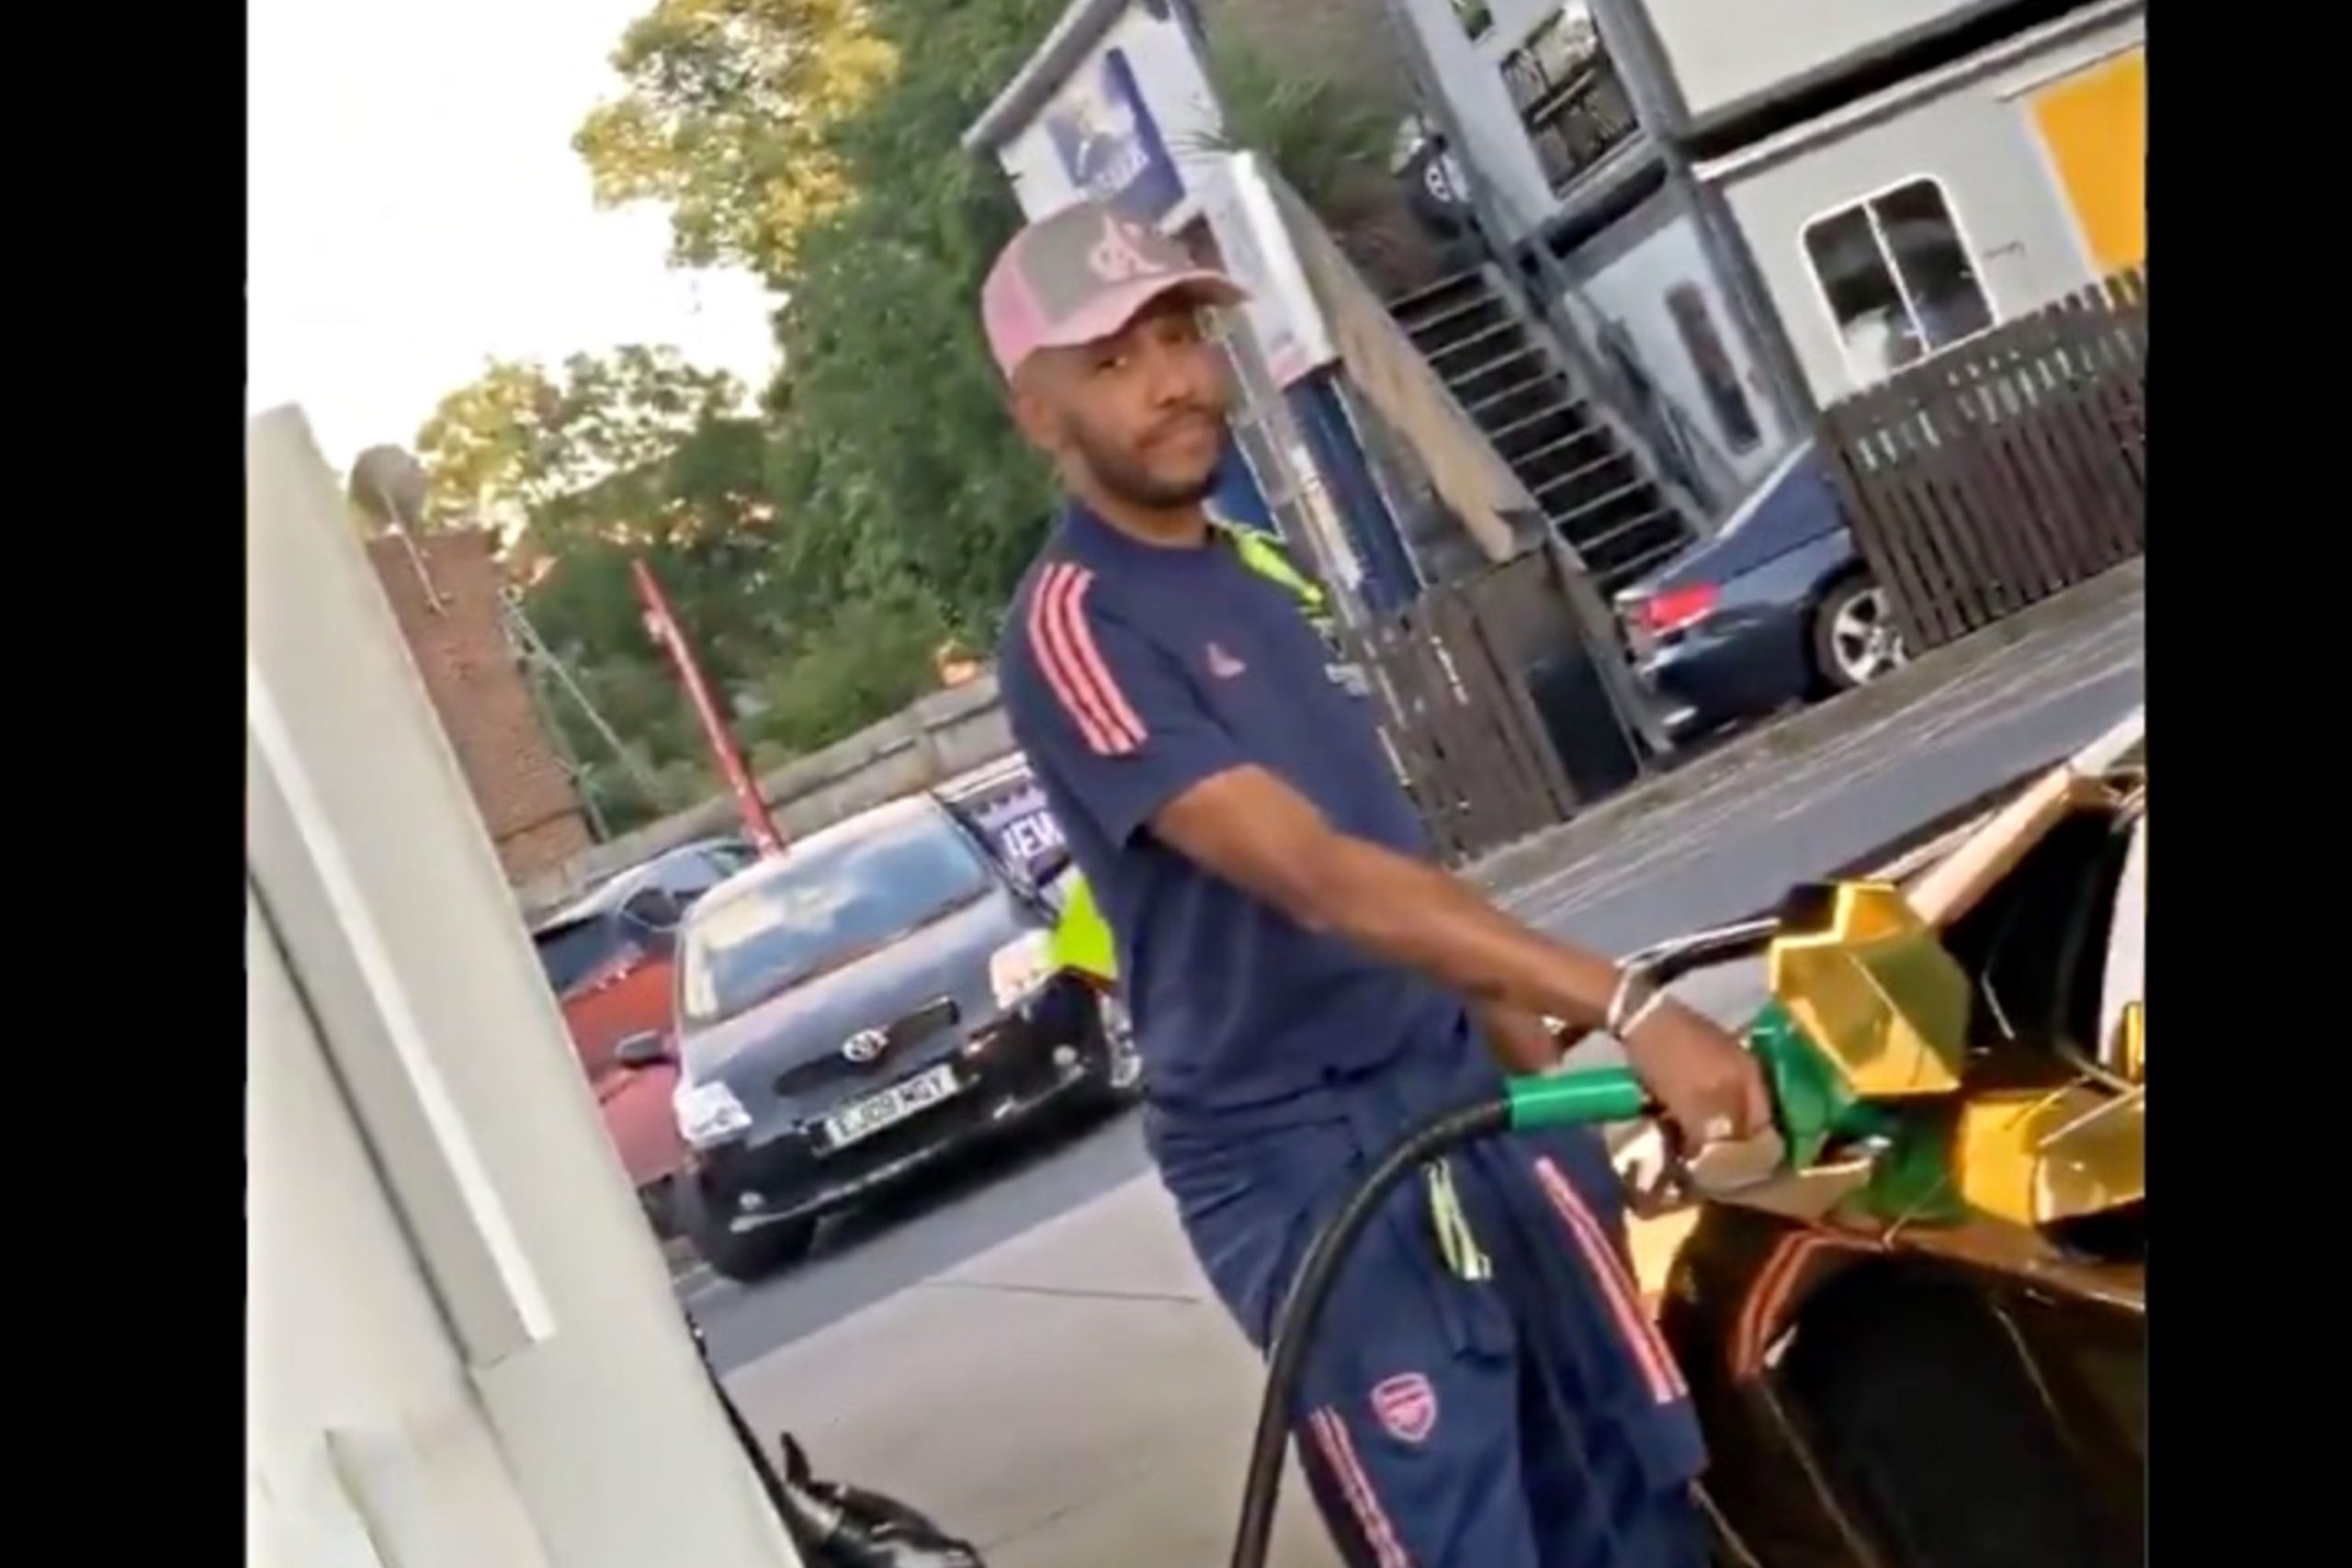 Tottenham fan inflicts more misery as Aubameyang gets trolled at a gas station after derby loss